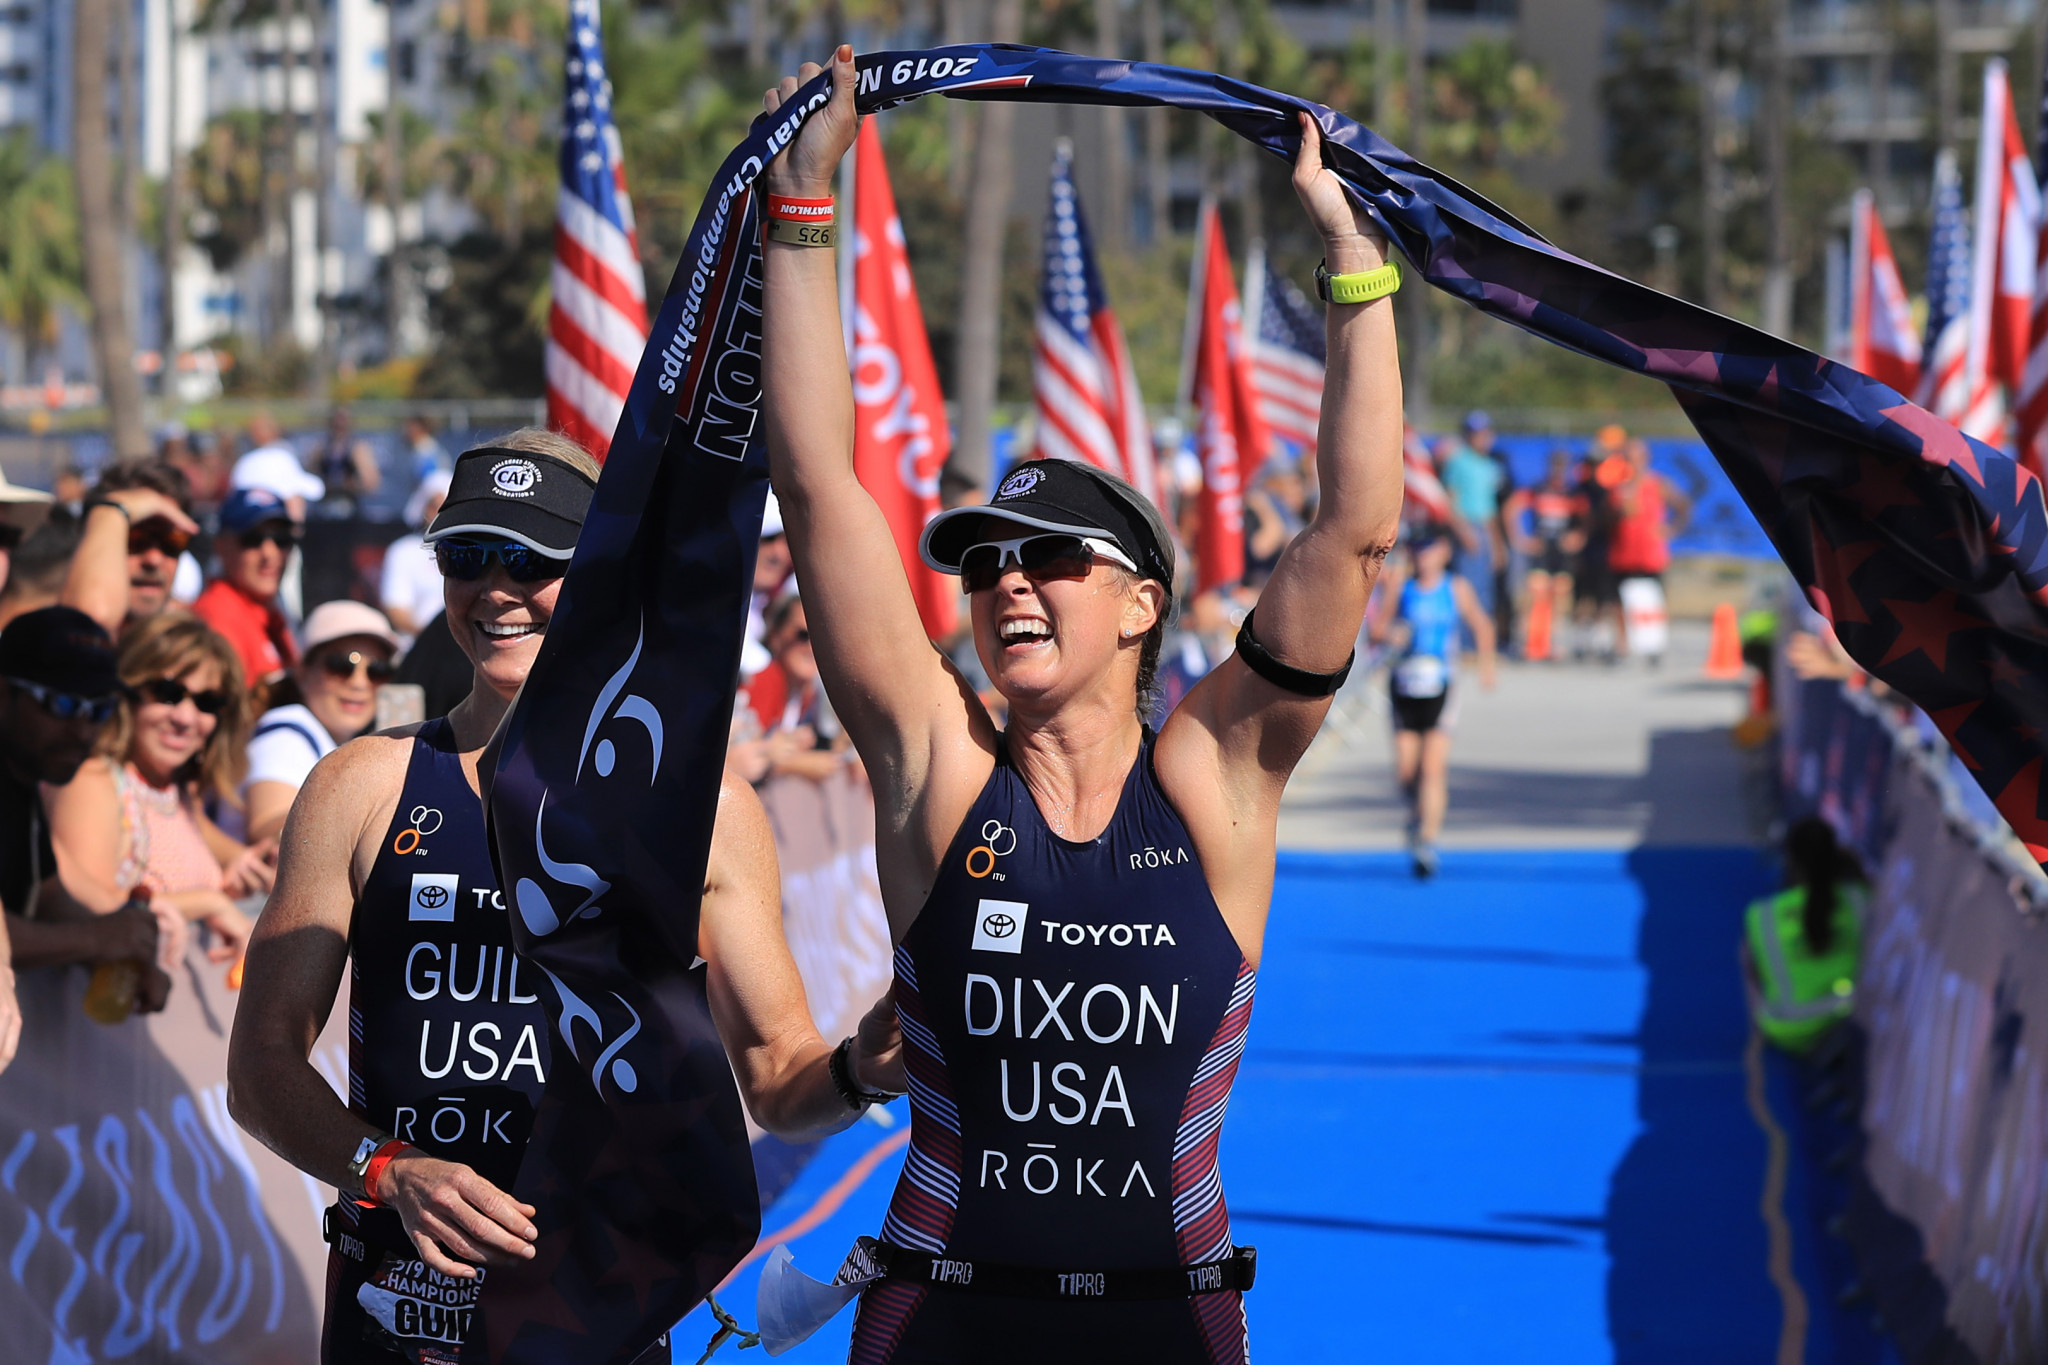 The Championships will form part of the Legacy Triathlon weekend in Long Beach ©Getty Images